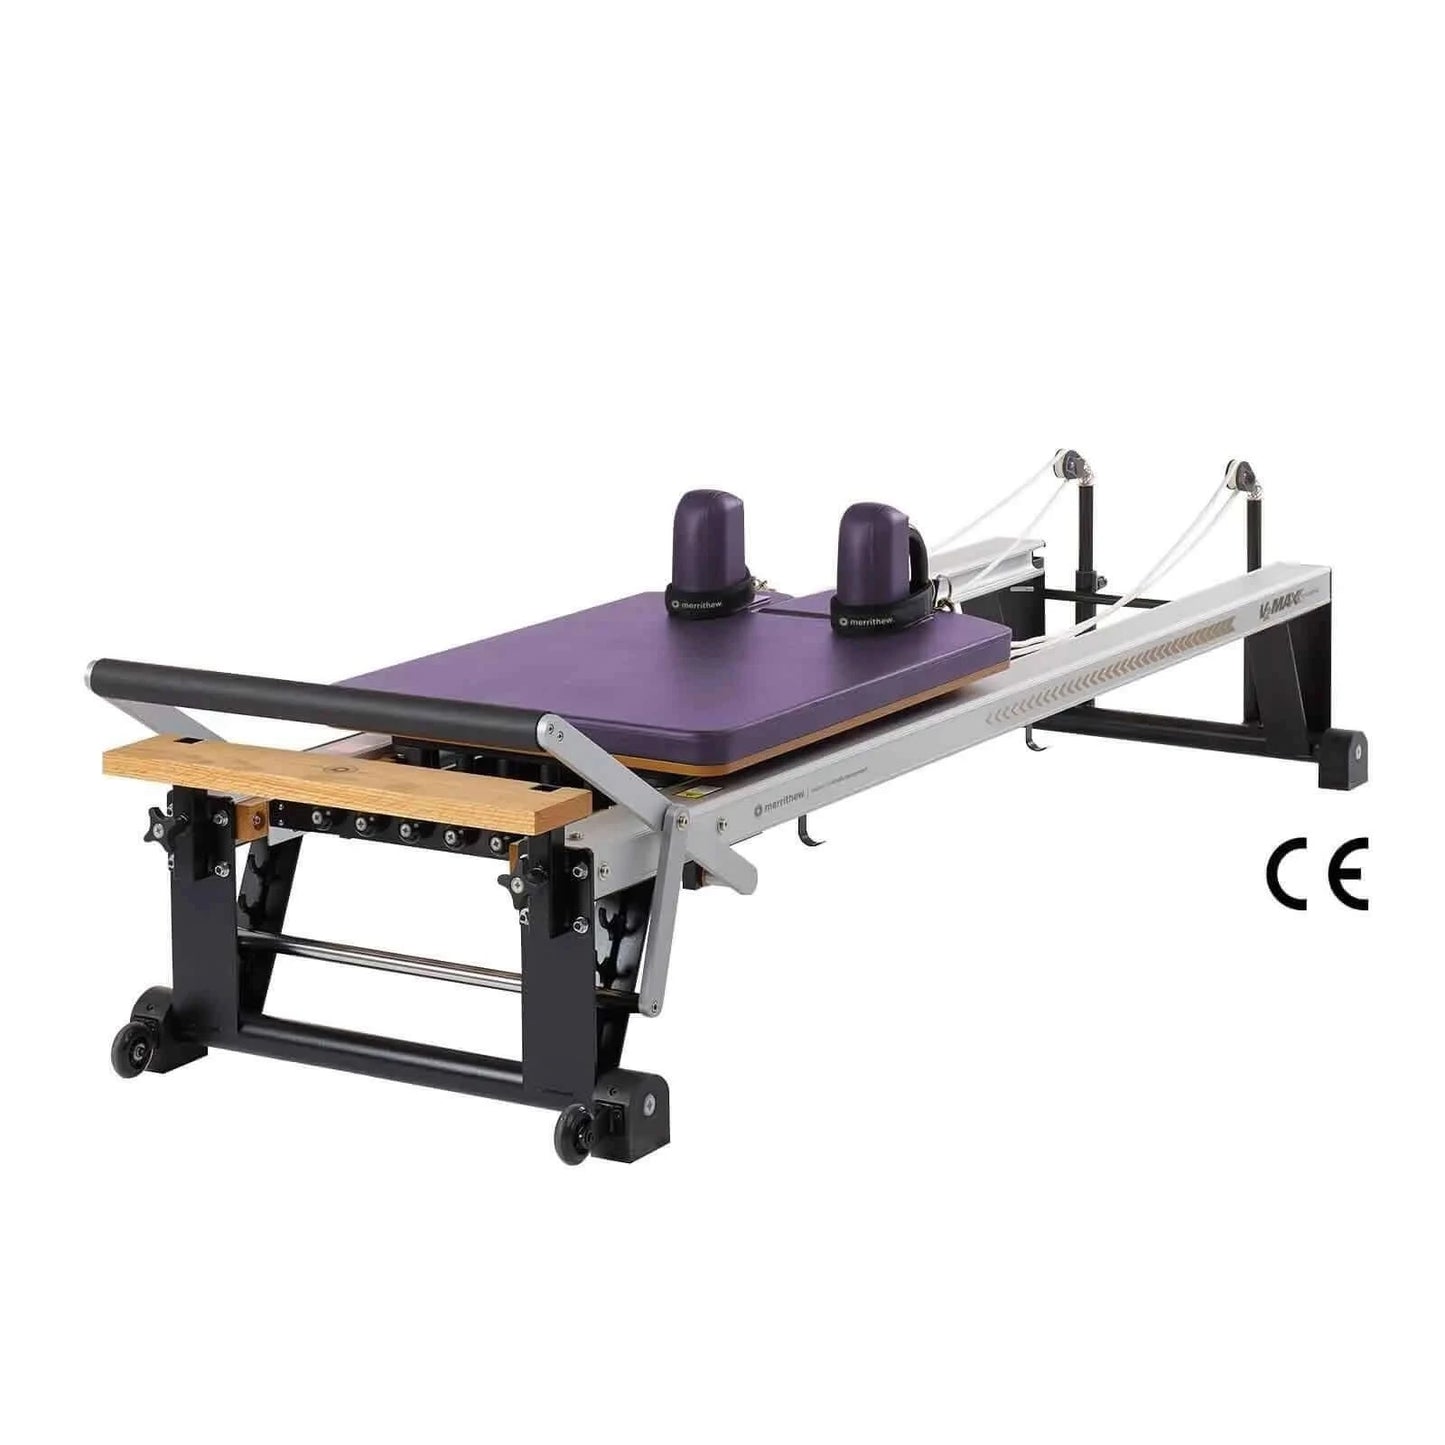 Purple Impulse Merrithew™ Pilates V2 Max™ Reformer Machine by Merrithew™ sold by Pilates Matters® by BSP LLC